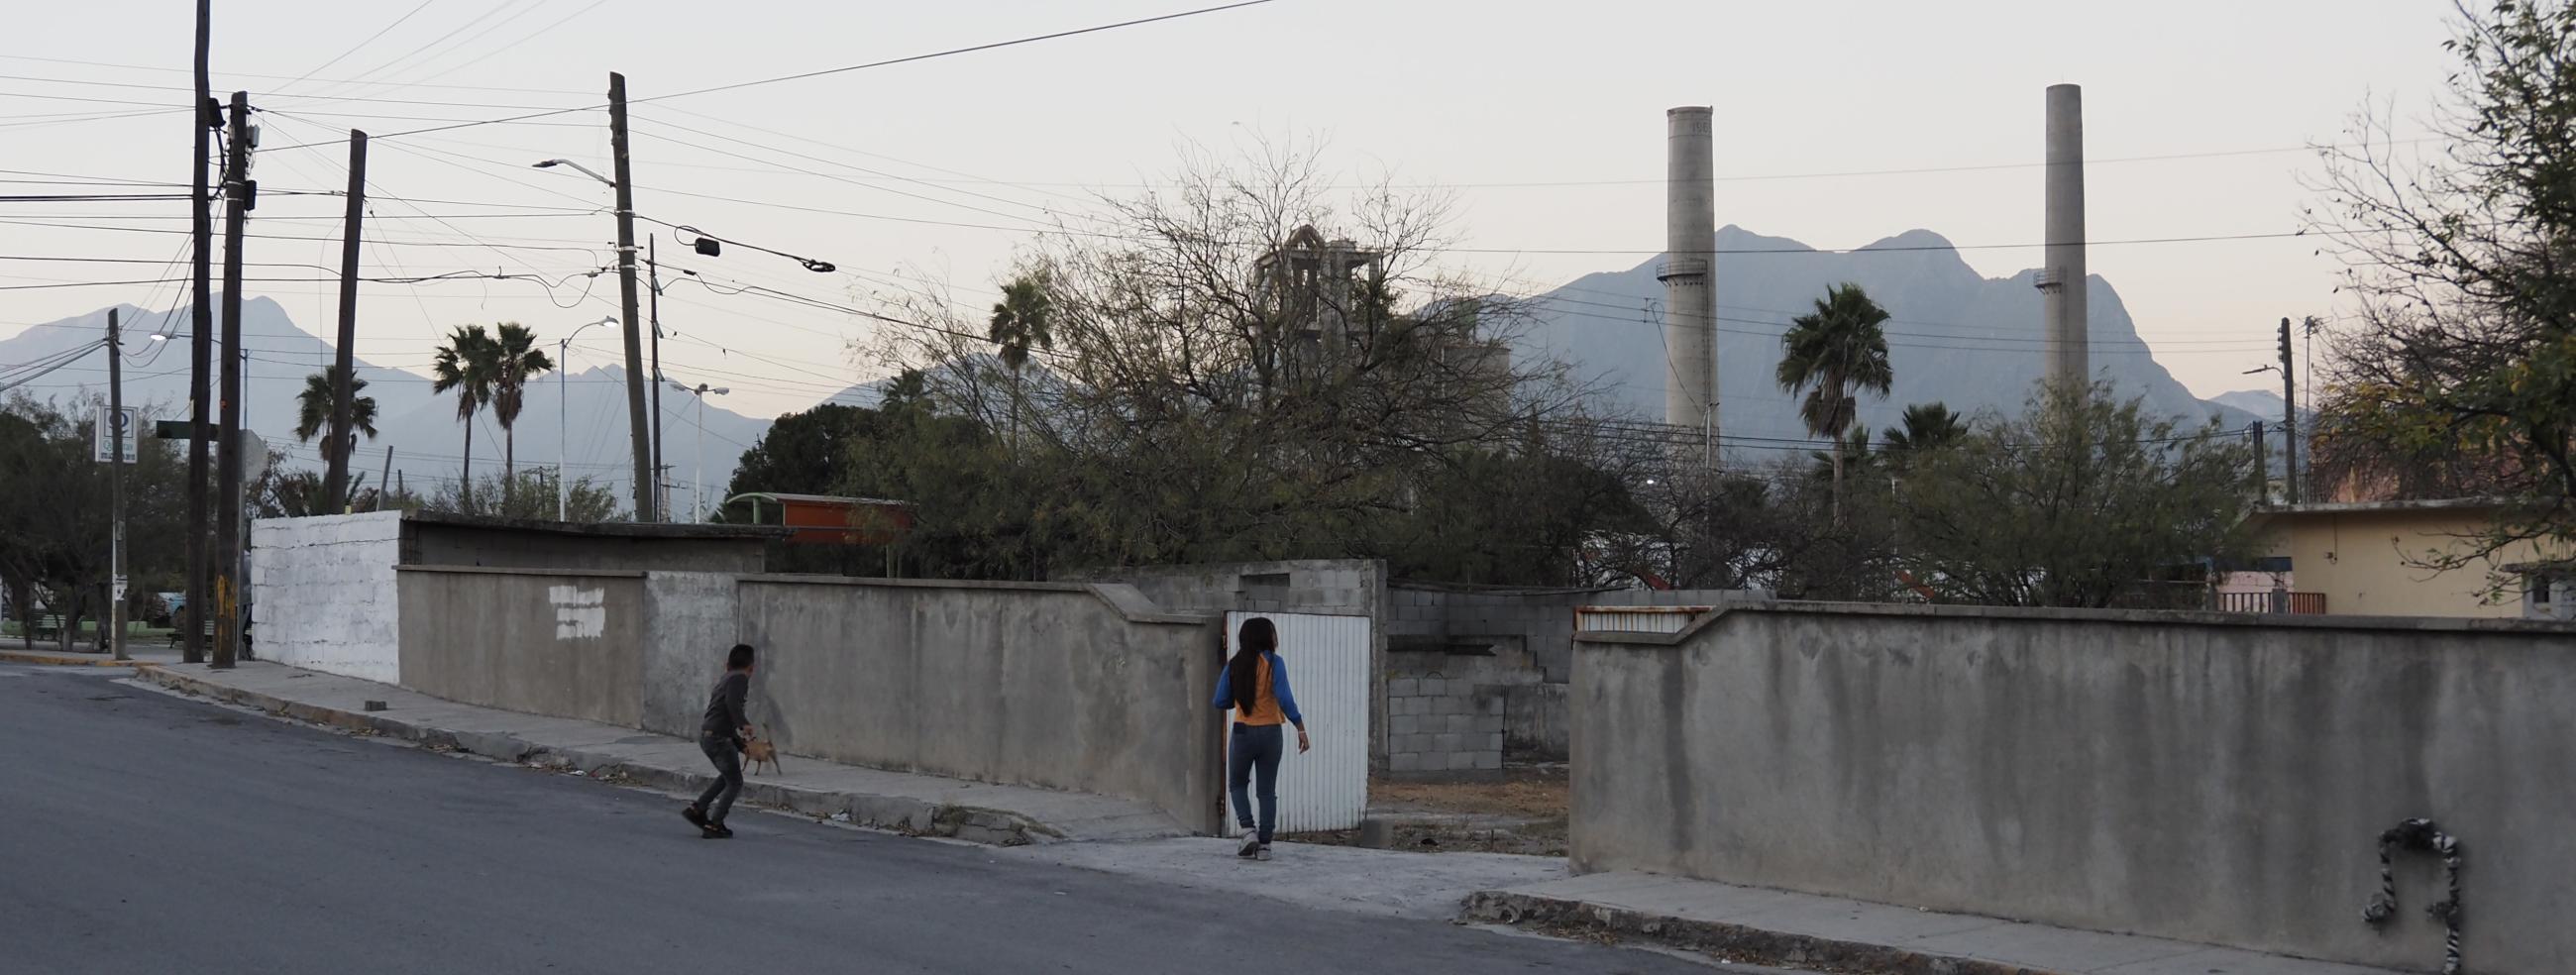 Two kids playing in downtown Hidalgo, overlooking the CEMEX cement factory.